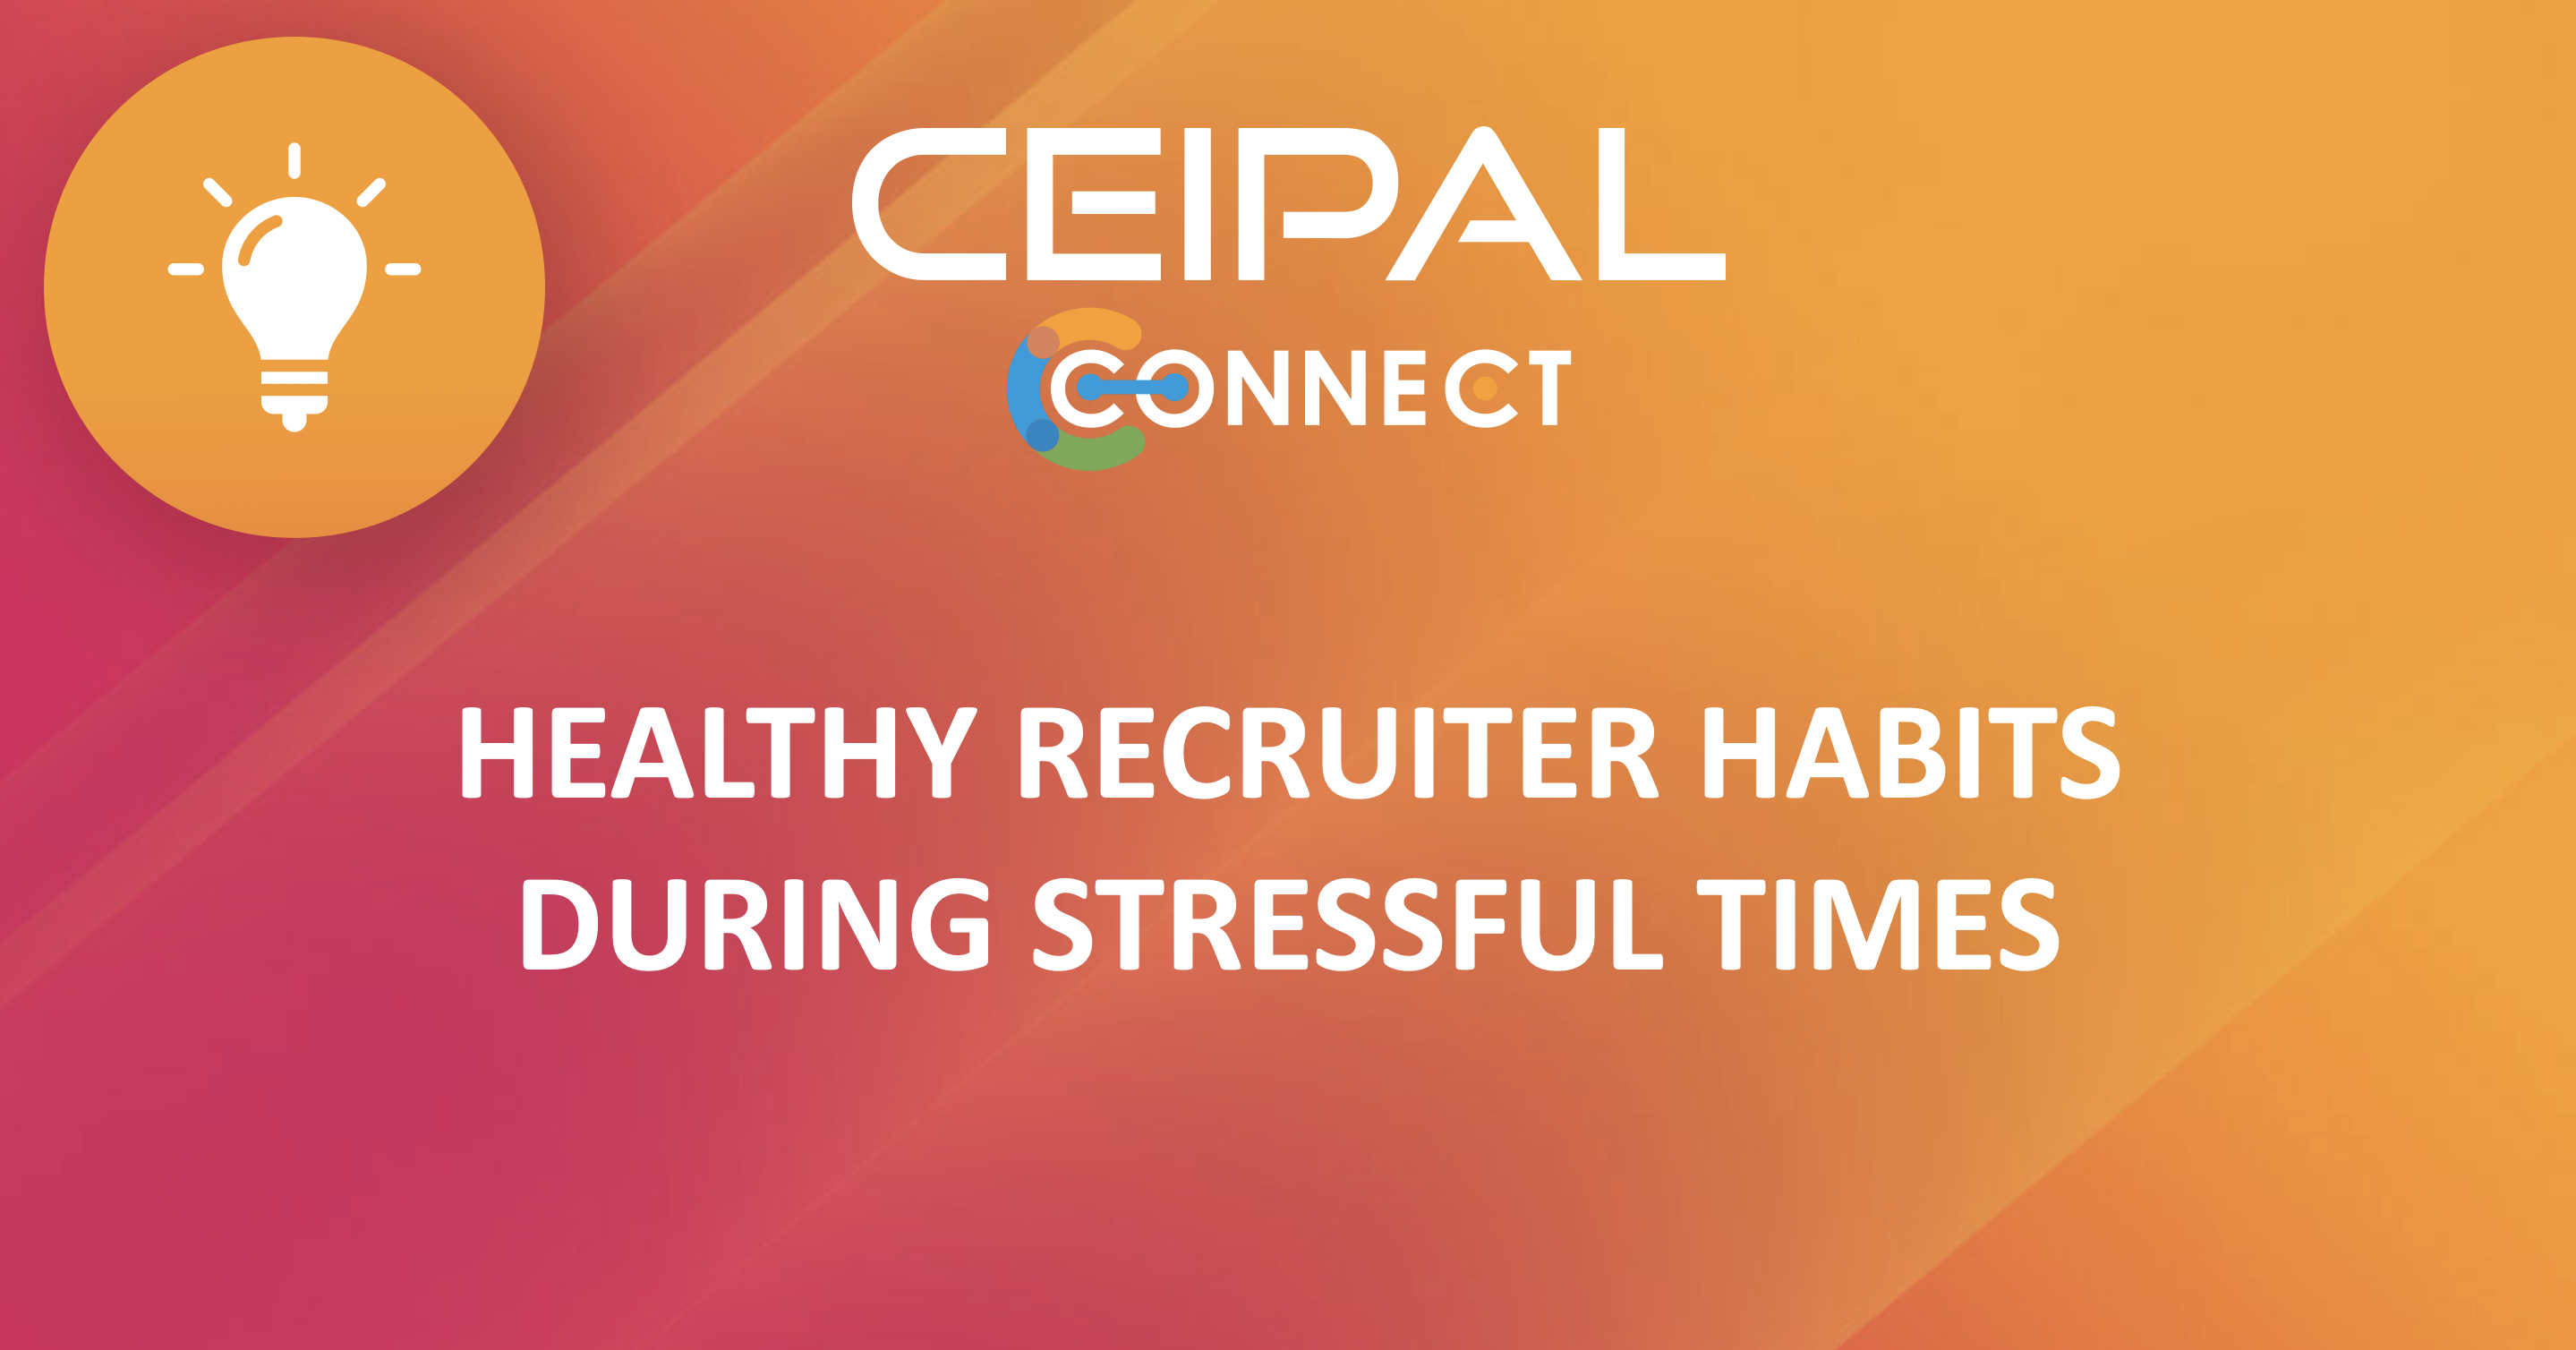 Healthy Recruiter Habits During Stressful Times